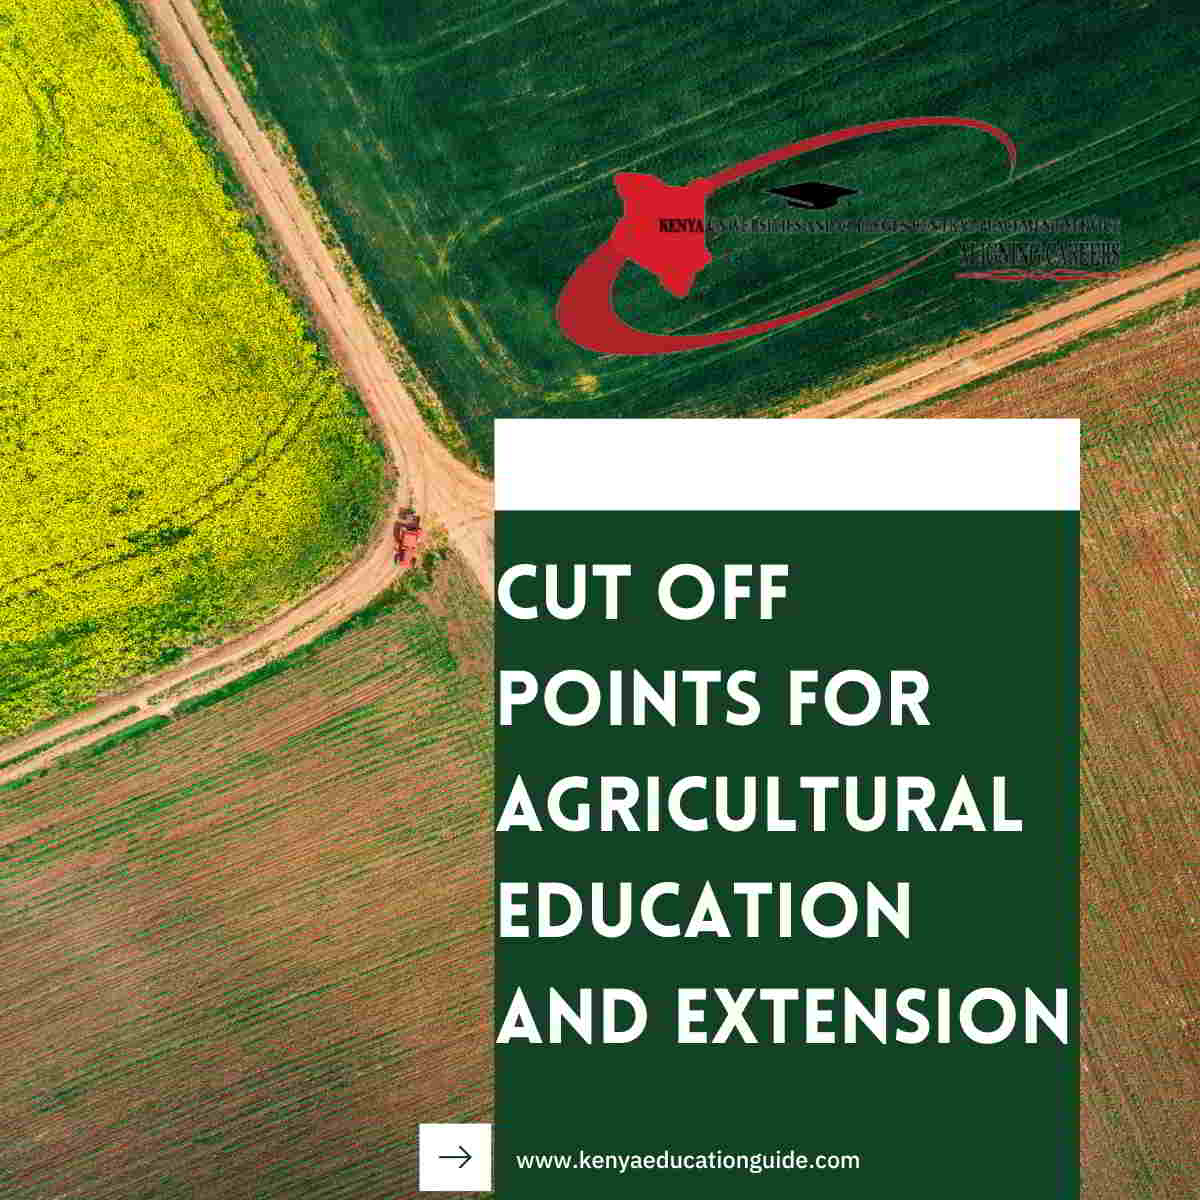 Cut off points for agricultural education and extension